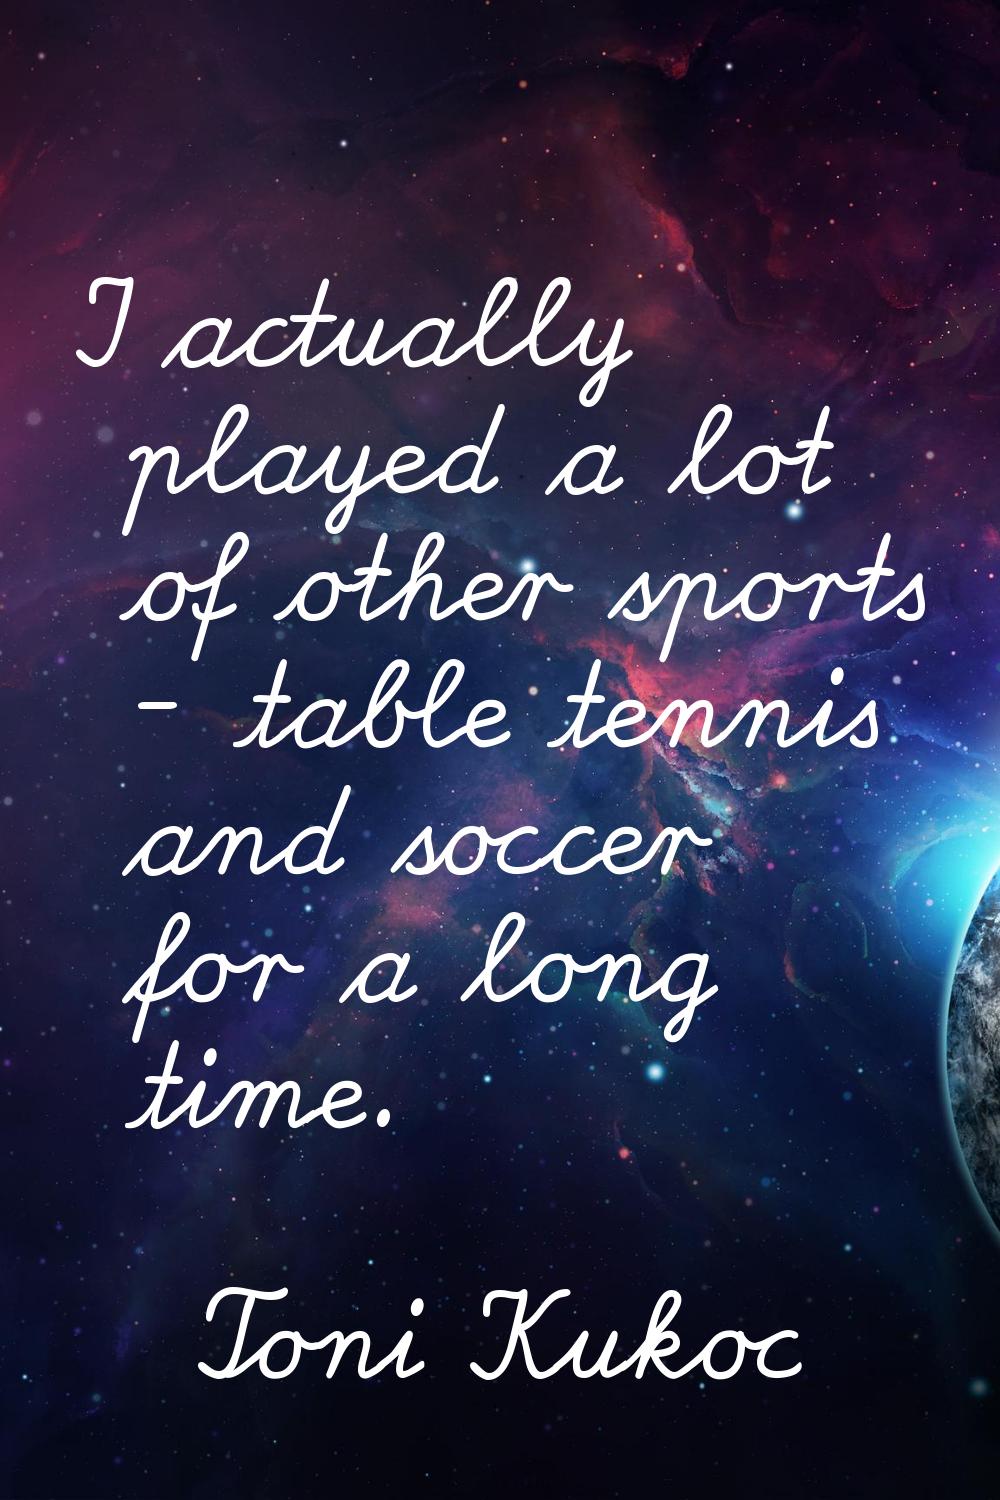 I actually played a lot of other sports - table tennis and soccer for a long time.